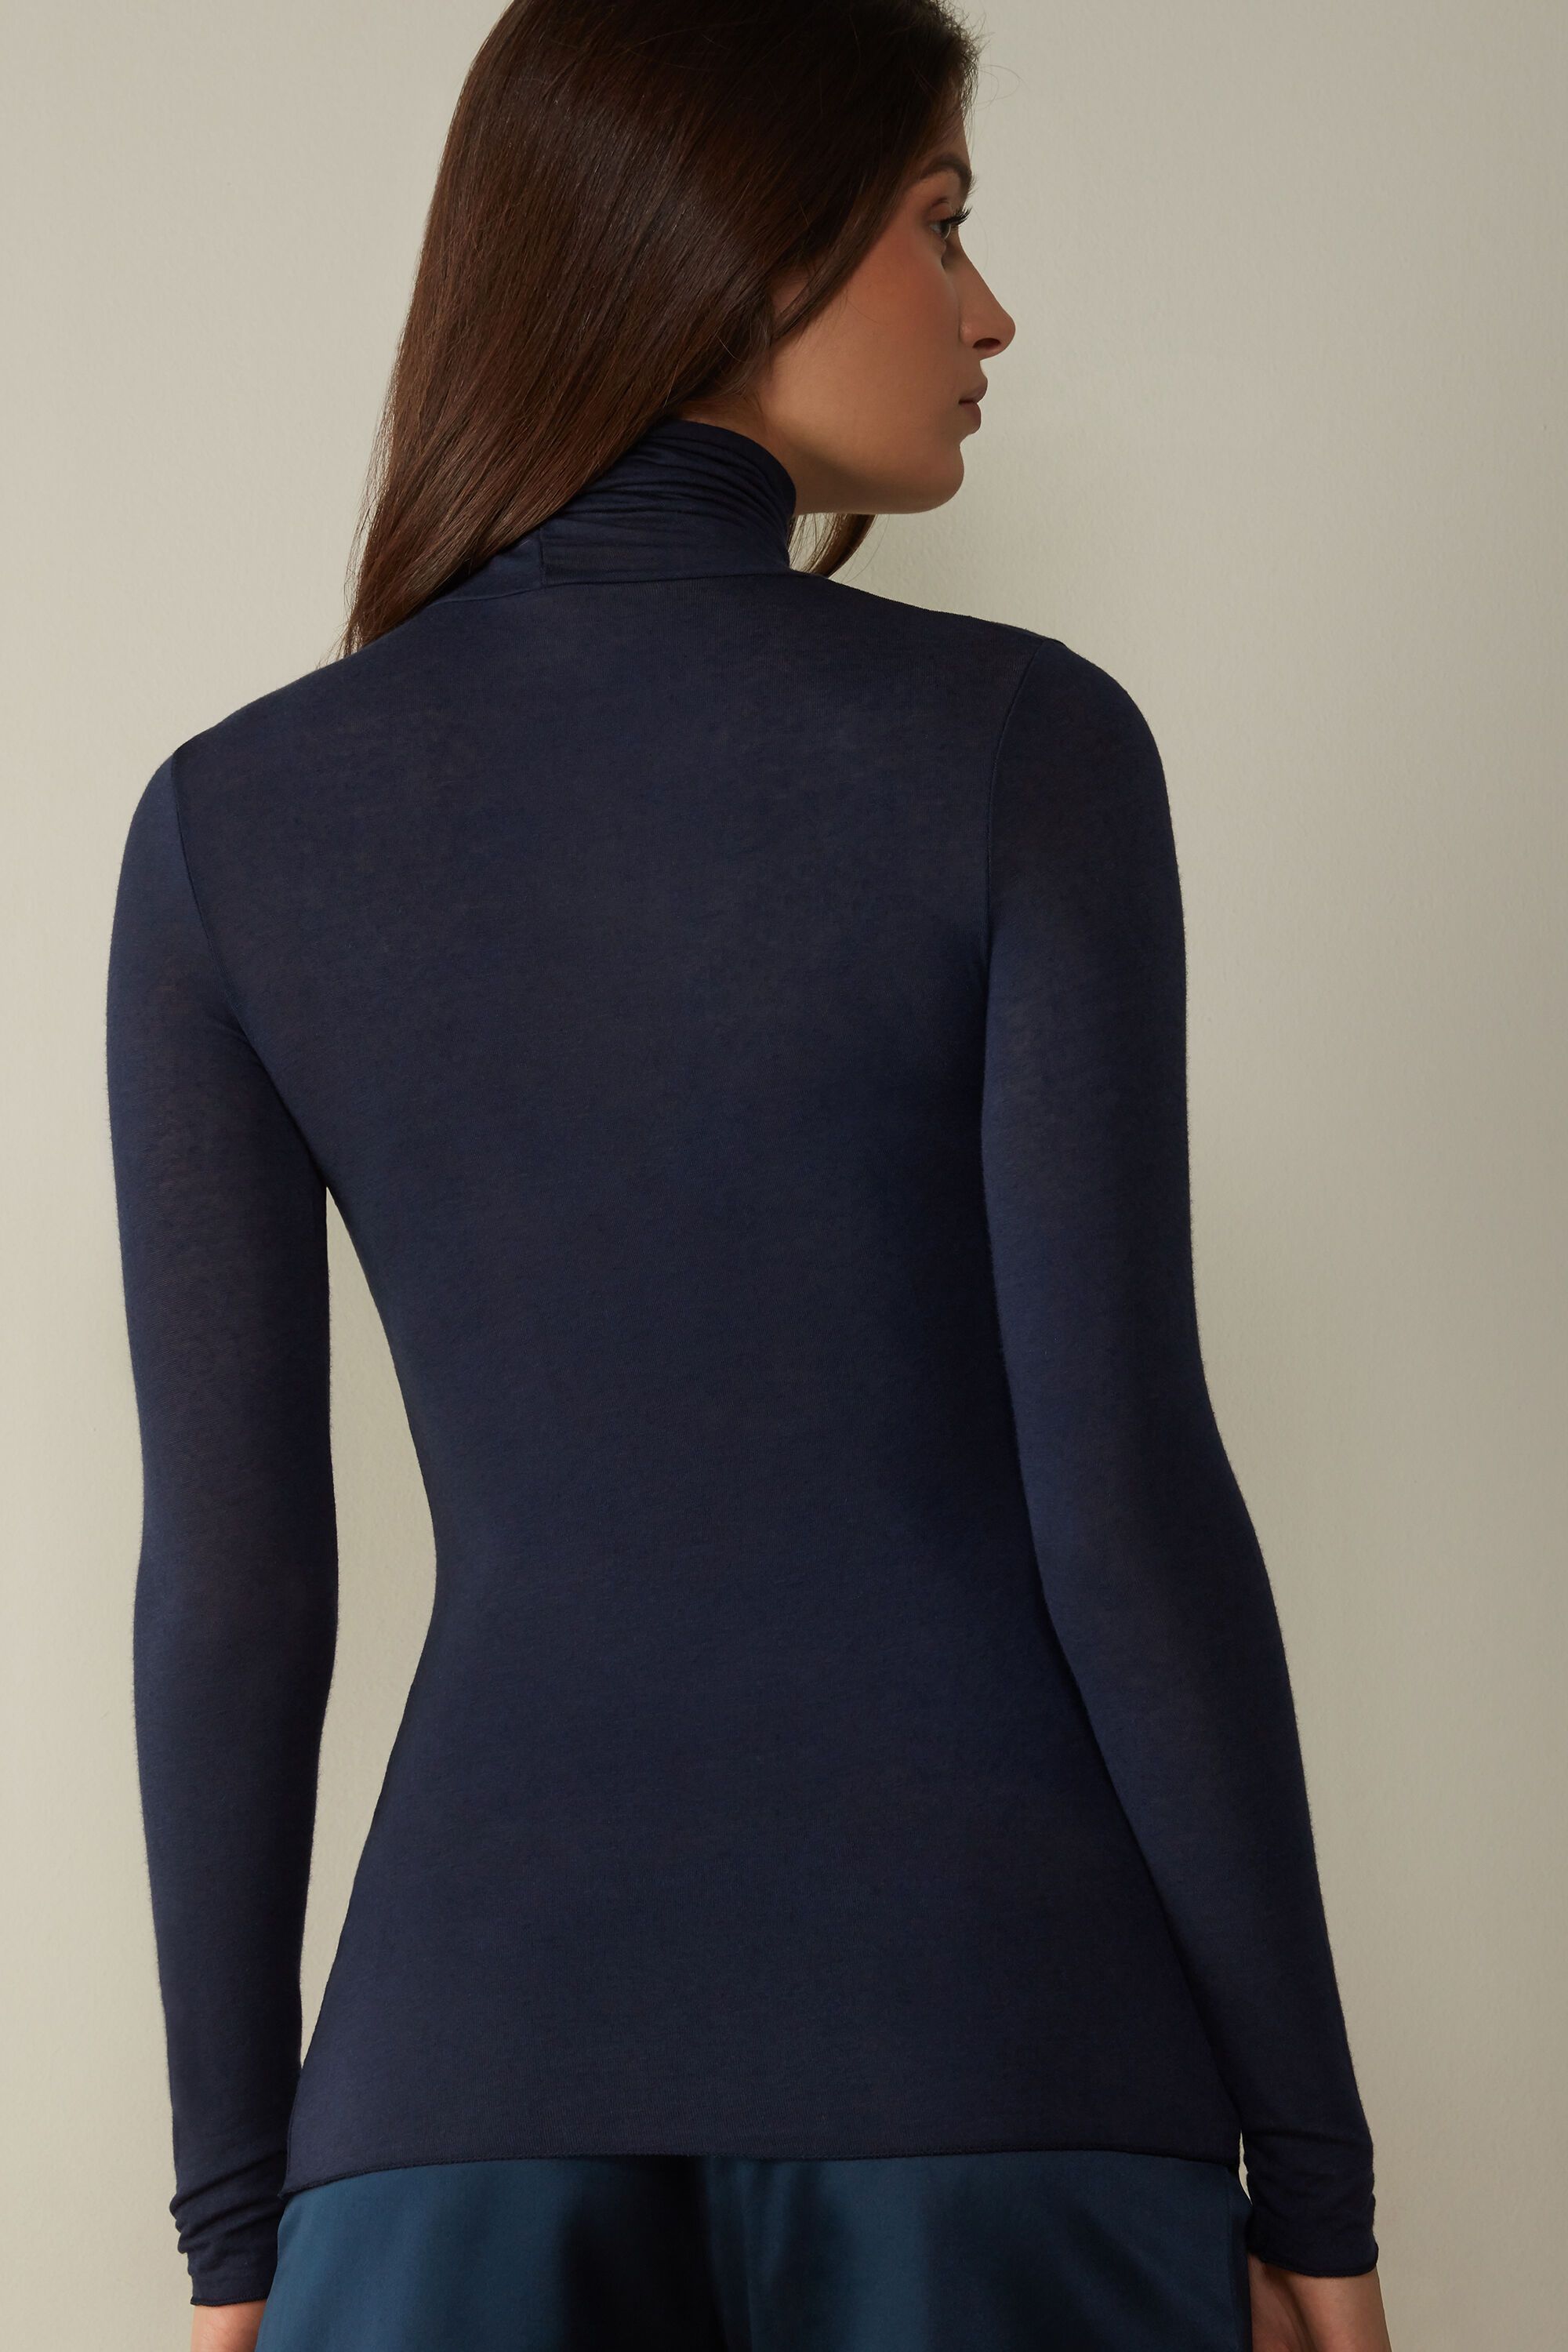 Modal Cashmere Ultralight High-Neck Top | Intimissimi (US)